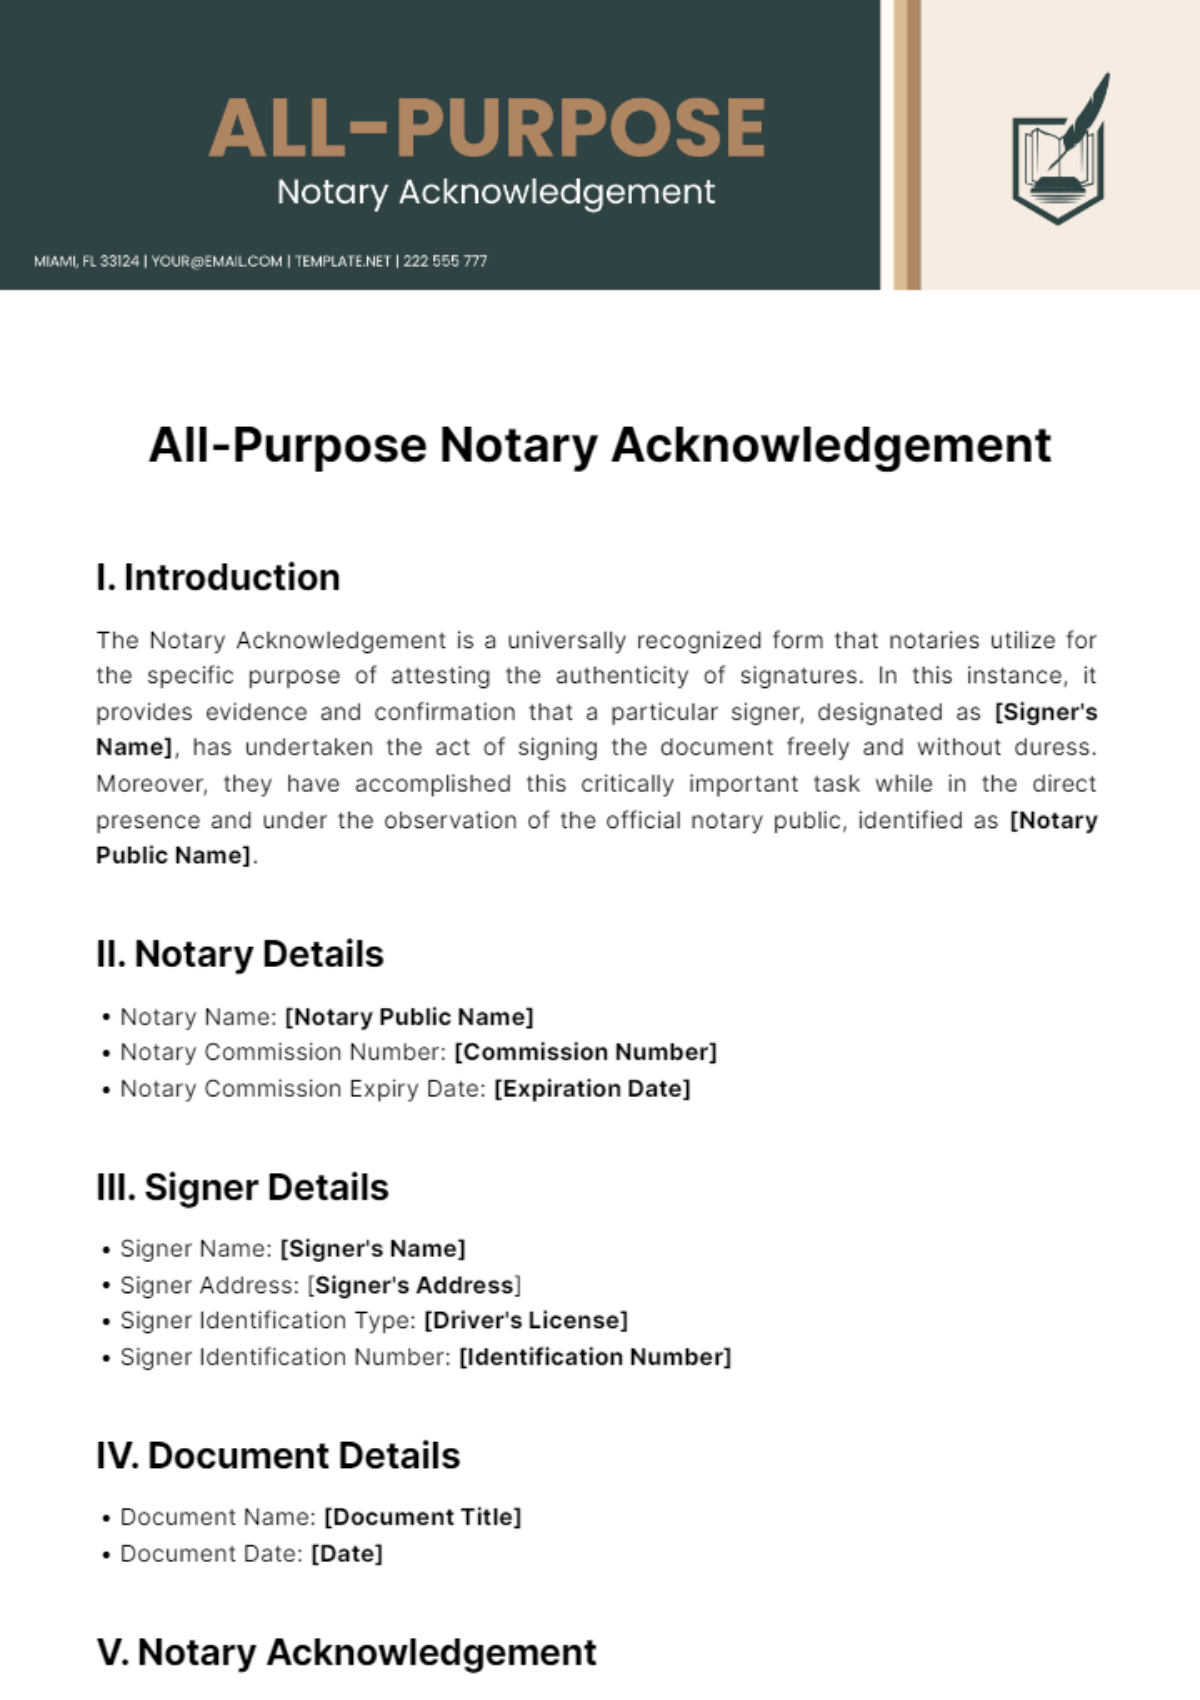 All-Purpose Notary Acknowledgement Template